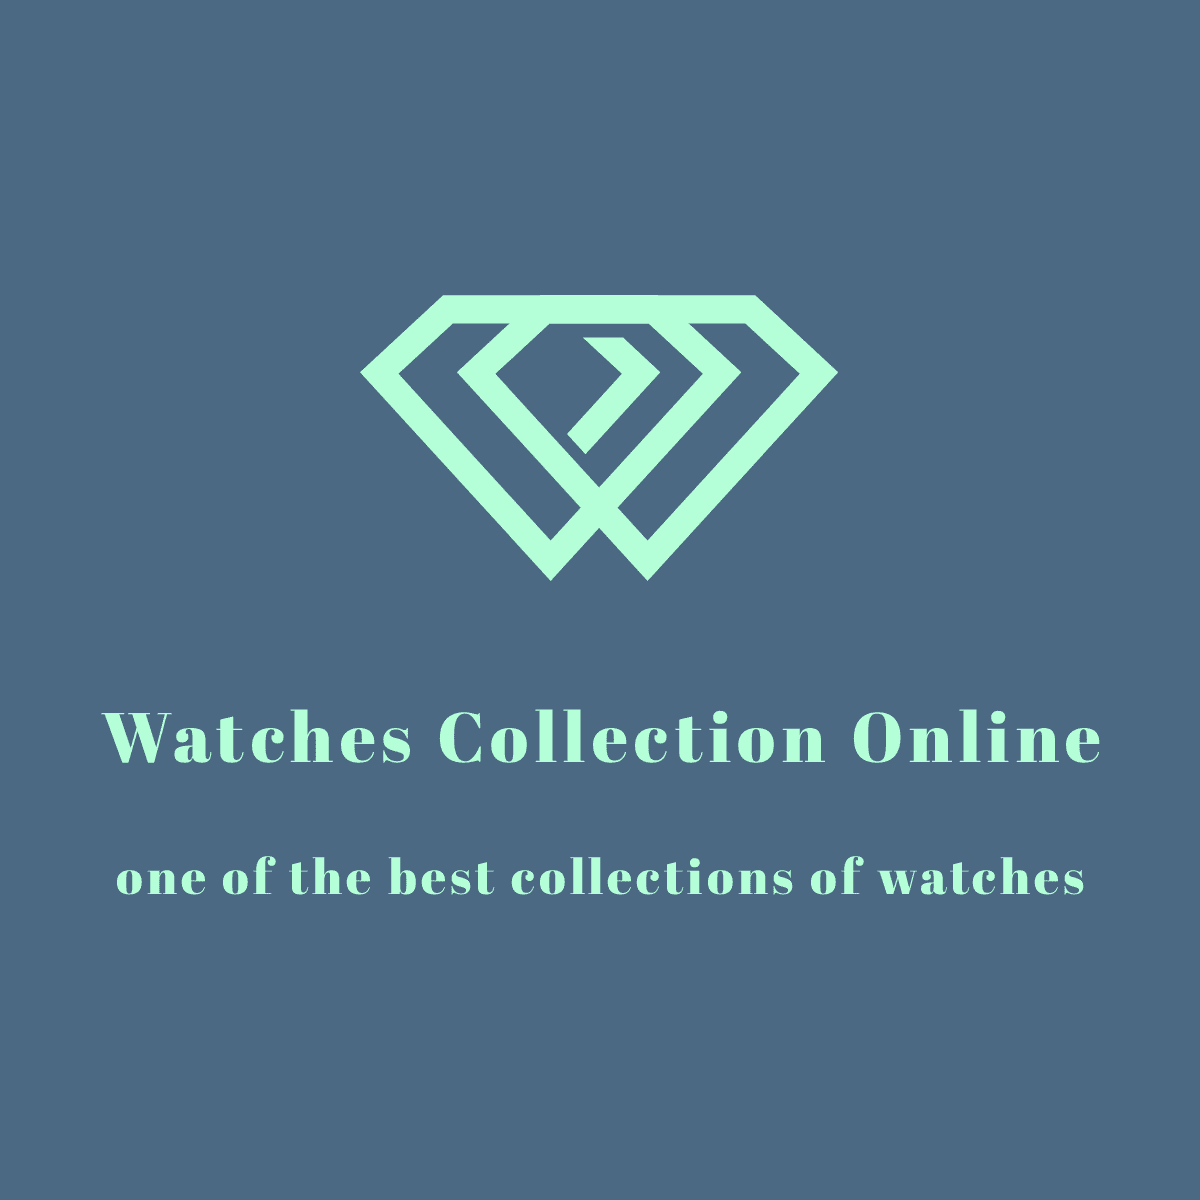 Watches Collection Online